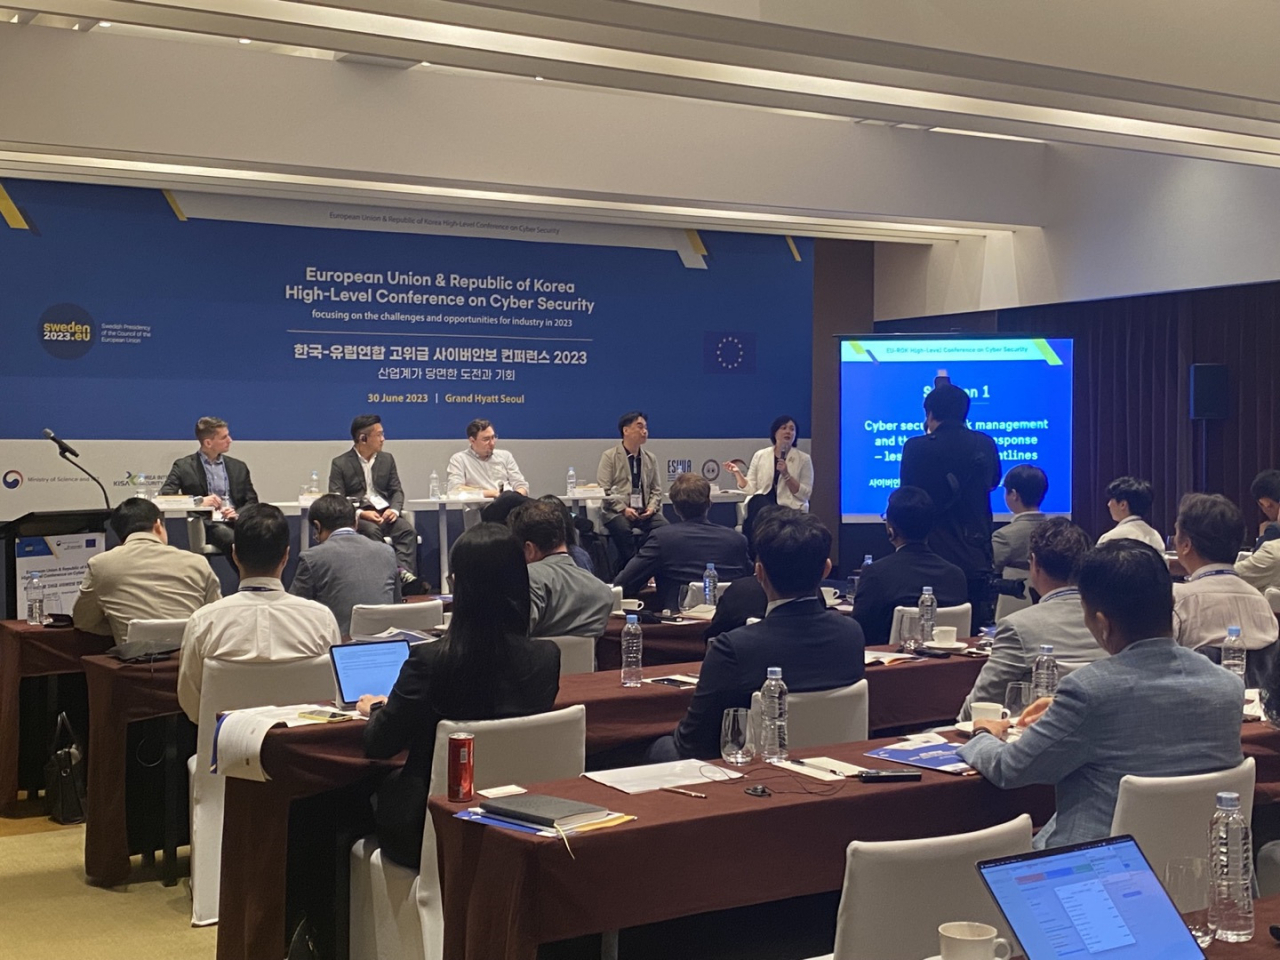 Panelists discuss Cyber security risk management and threat incident response – lessons from the frontlines in EU-Korea high-level conference on Cyber Security at Grand Hyatt, Yongsan-gu, Seoul on Thursday. (Sanjay Kumar/The Korea Herald)